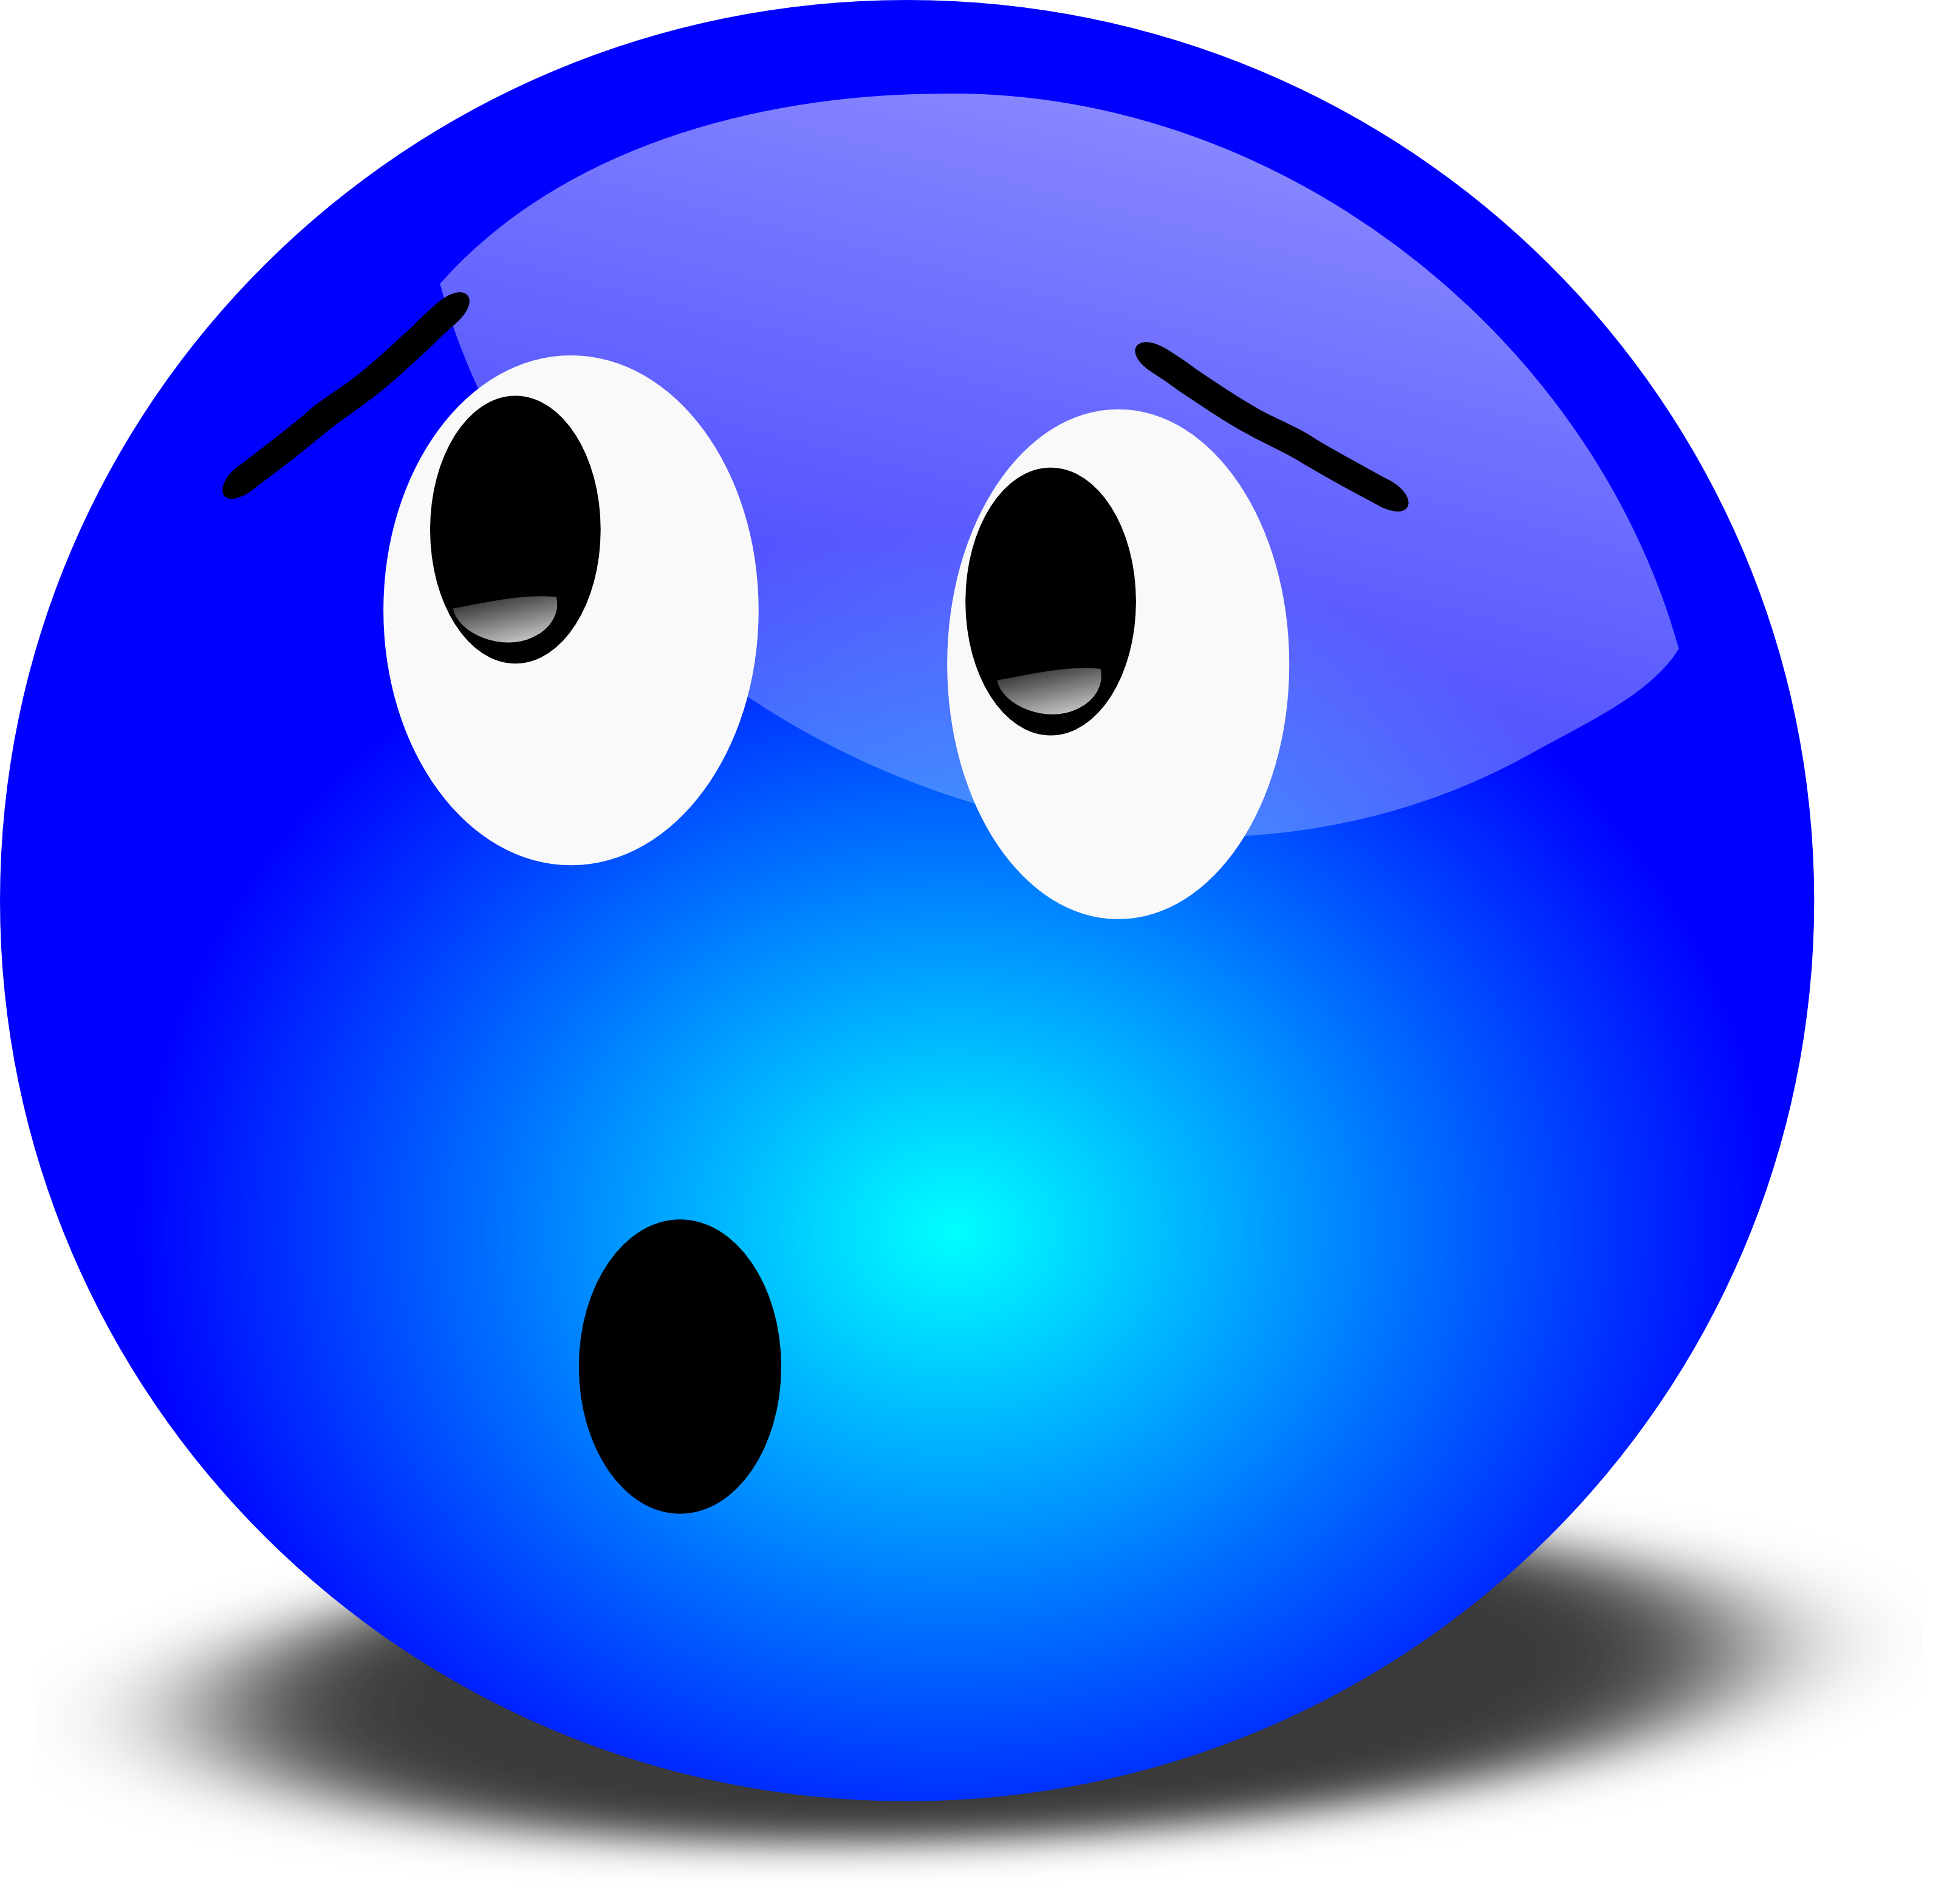 Free 3D Worried Smiley Face Clipart Illustration